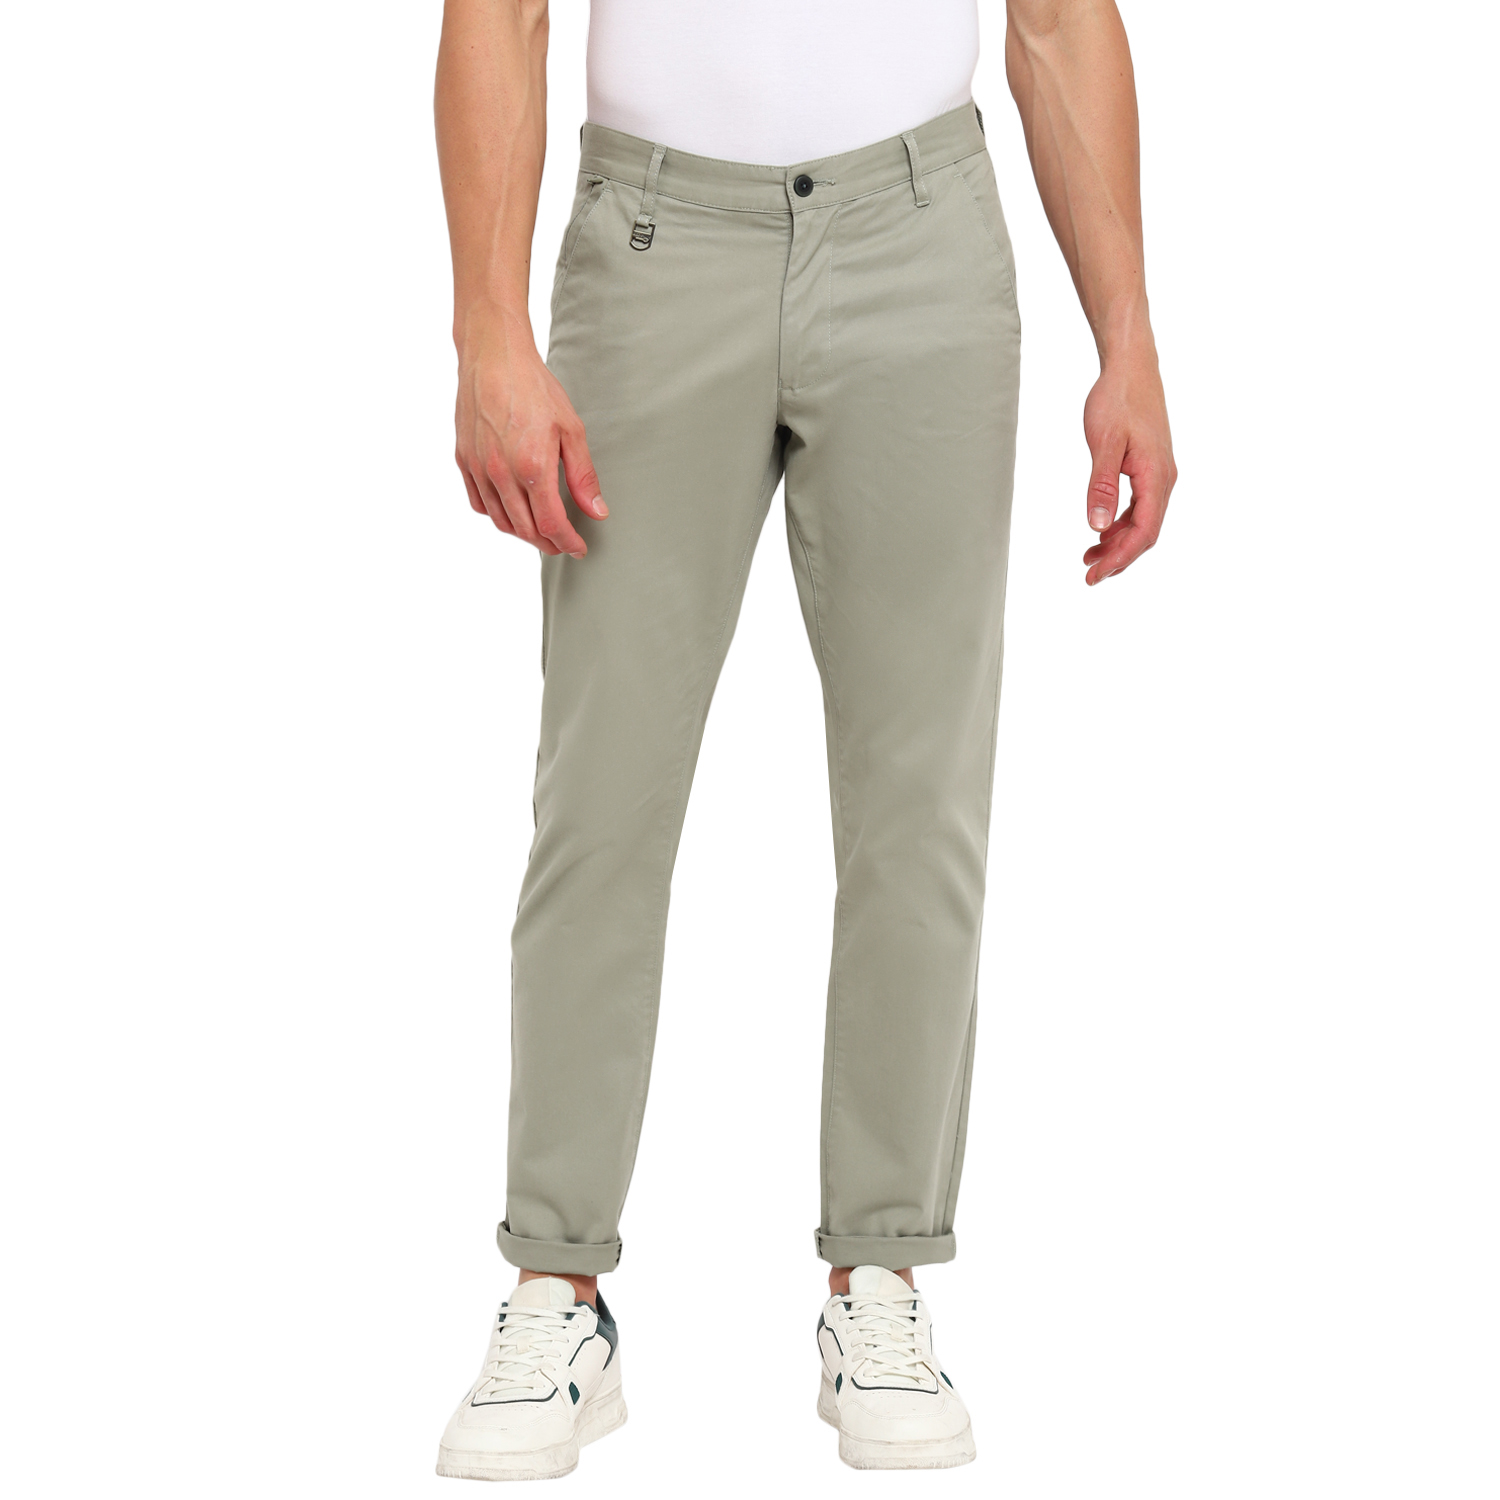 Buy invictus trousers men in India @ Limeroad